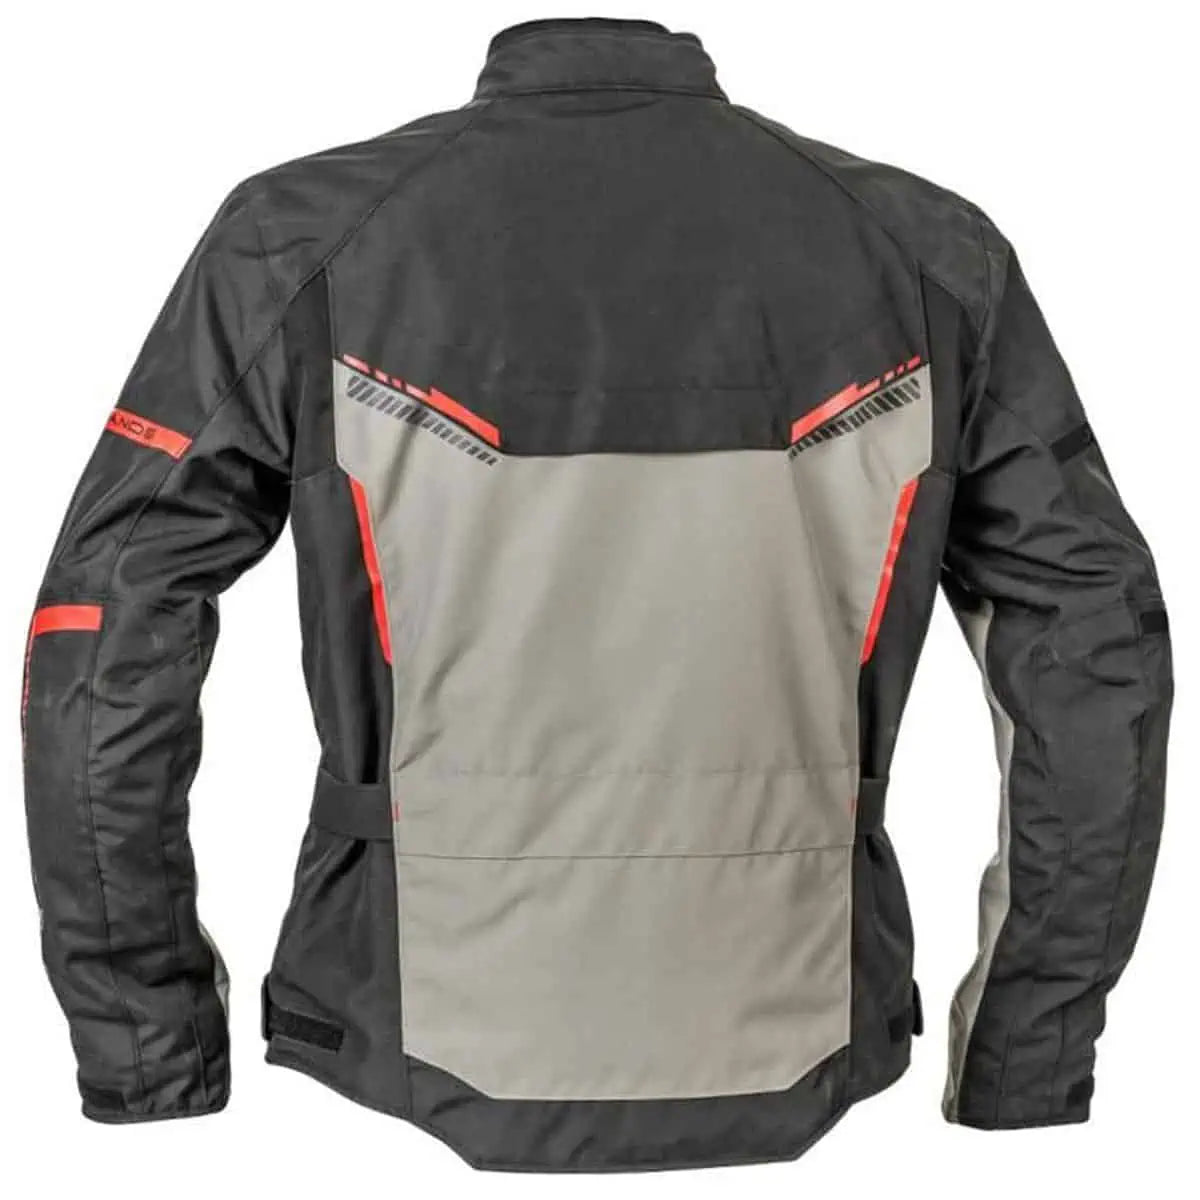 The Lindstrands Sylarna: A fully-featured textile motorcycling jacket - Back